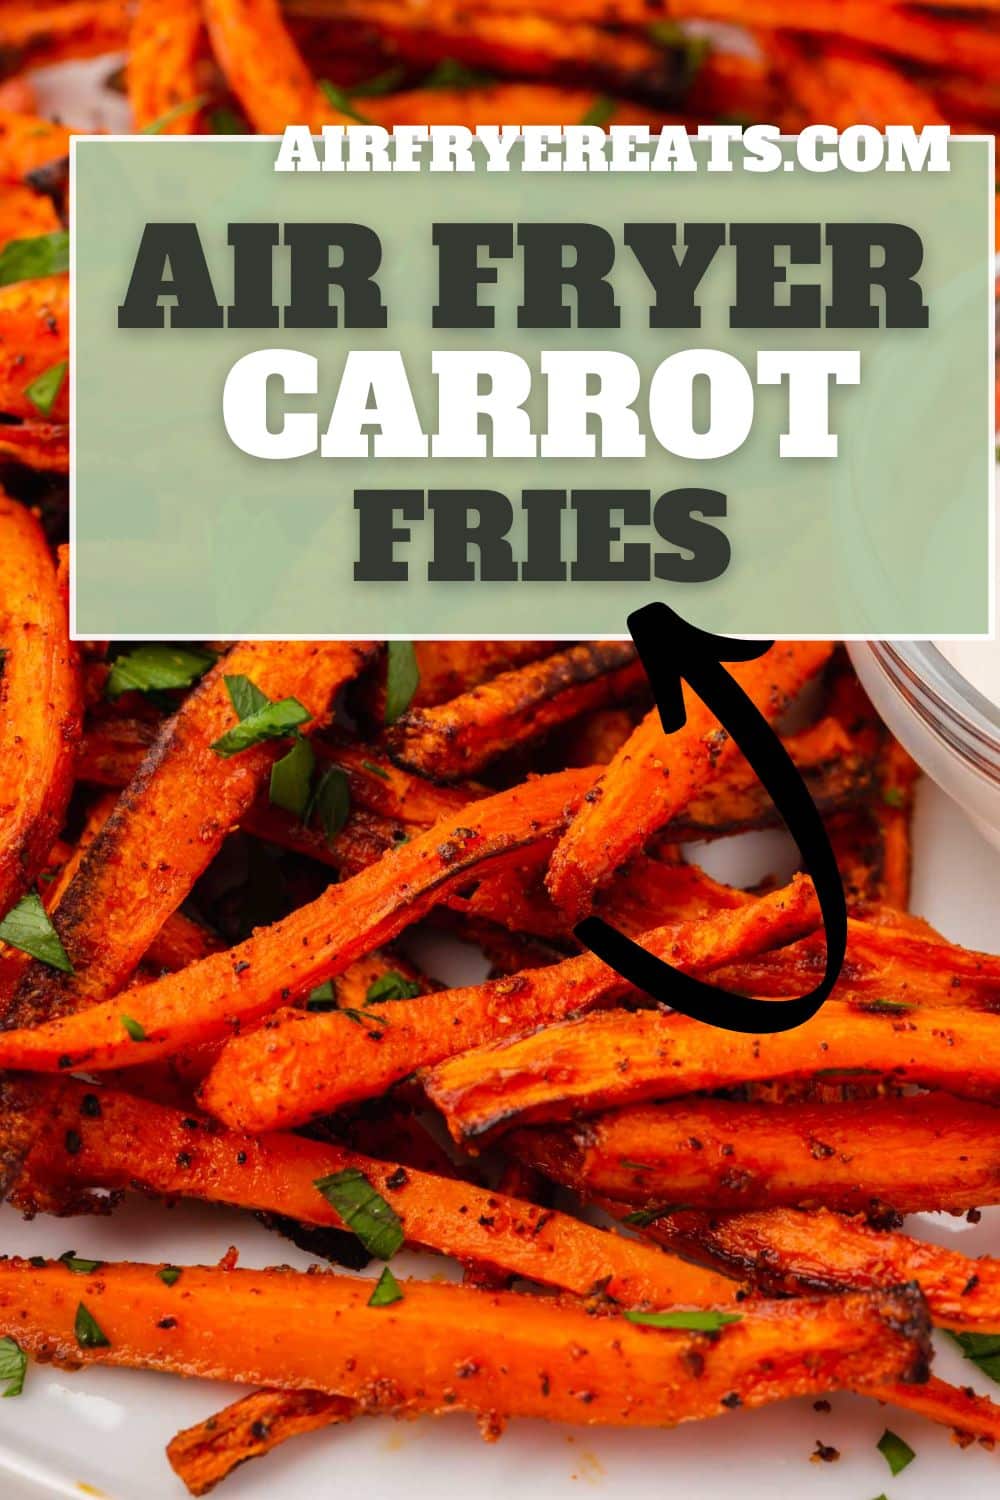 a photo or french fries made from carrots. Green text box at top says "air fryer carrot Fries"